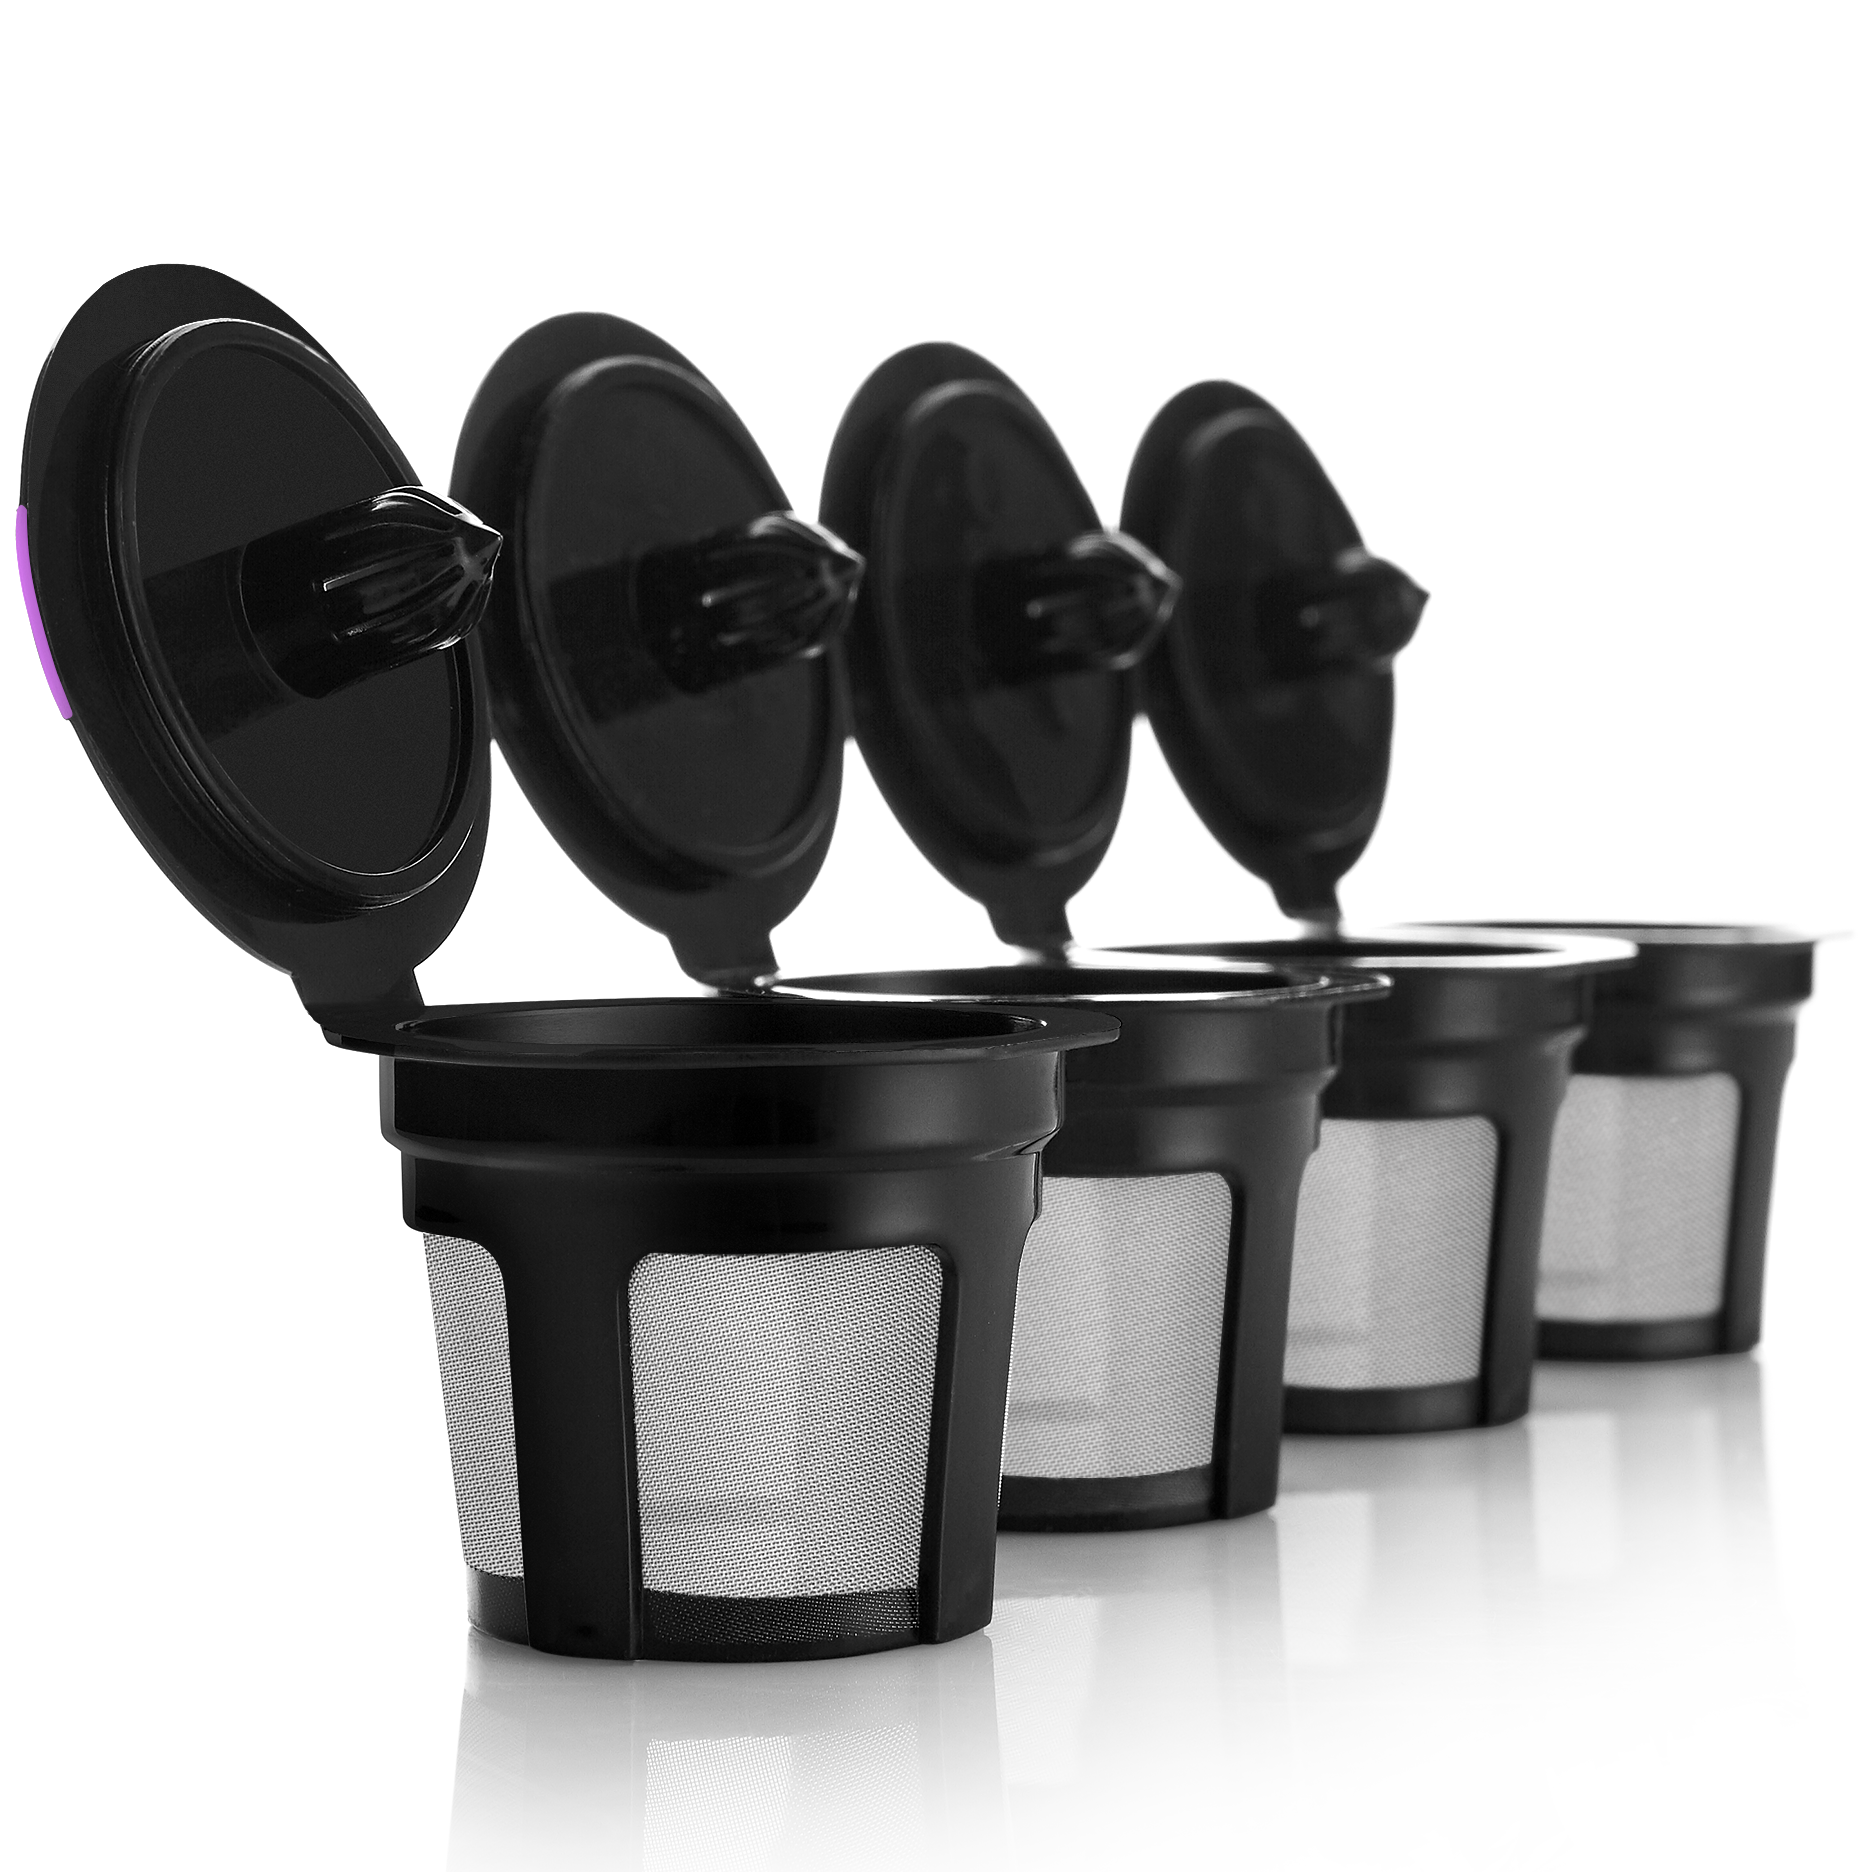 4 Reusable K Cups for Keurig K-Classic, K-Elite, K-Select, K-Cafe, K-Compact, K200, K300, K400, K500, Universal Fit Black Refillable Kcups Coffee Filters for 2.0 and 1.0 Brewers